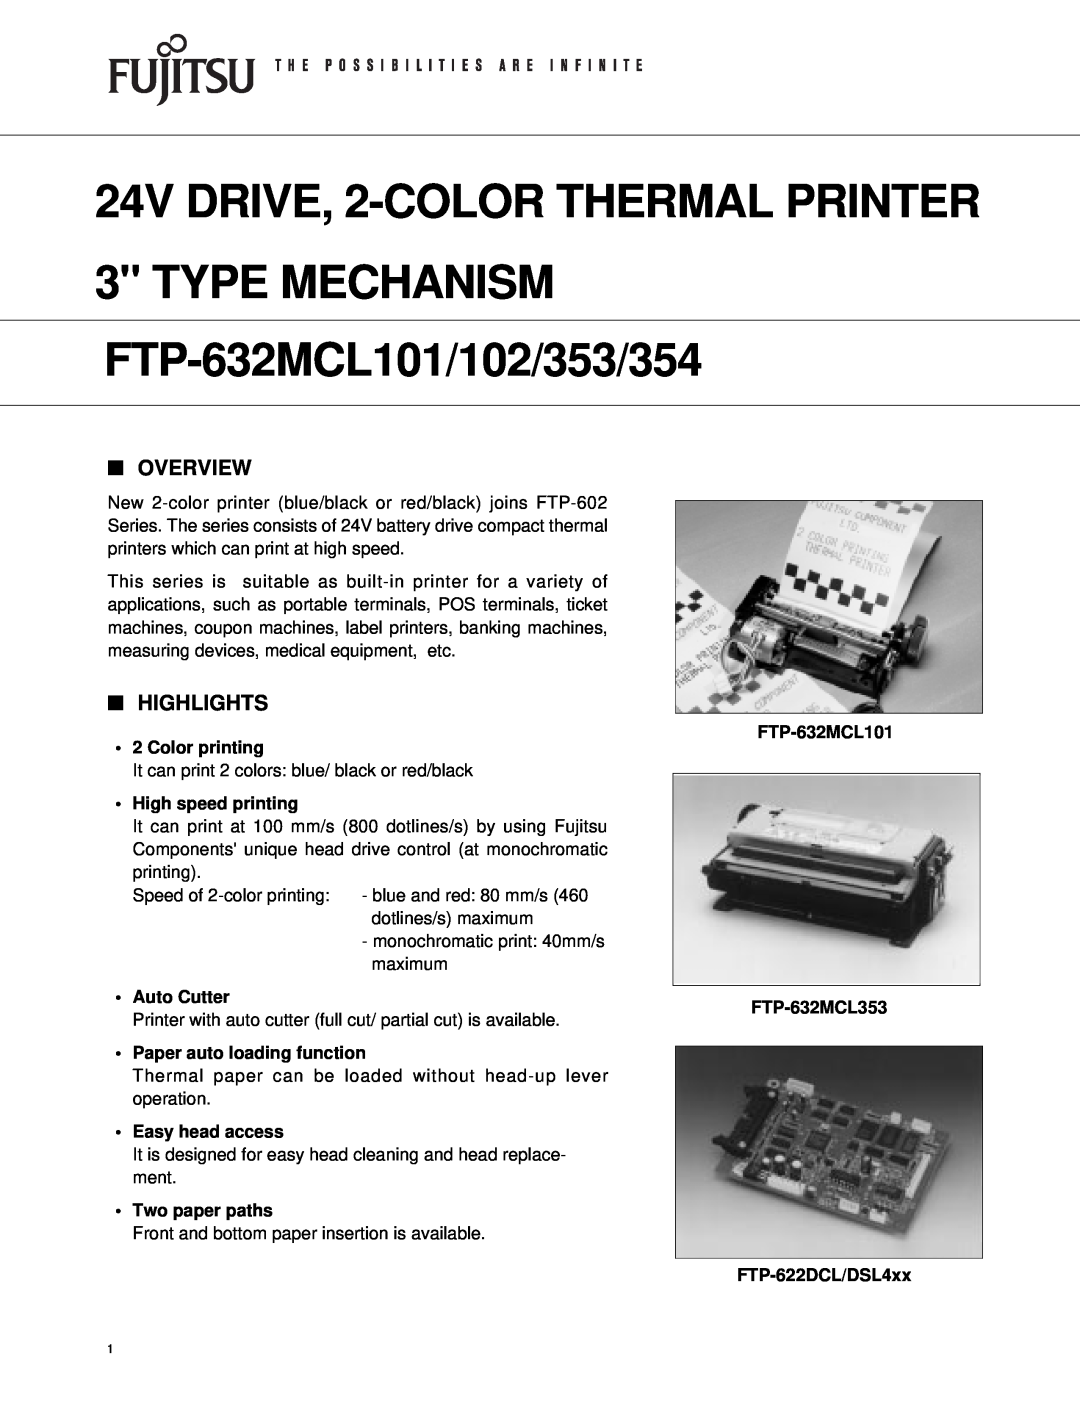 Fujitsu FTP-632MCL102 manual Overview, Highlights, Color printing, High speed printing, Auto Cutter, Easy head access 